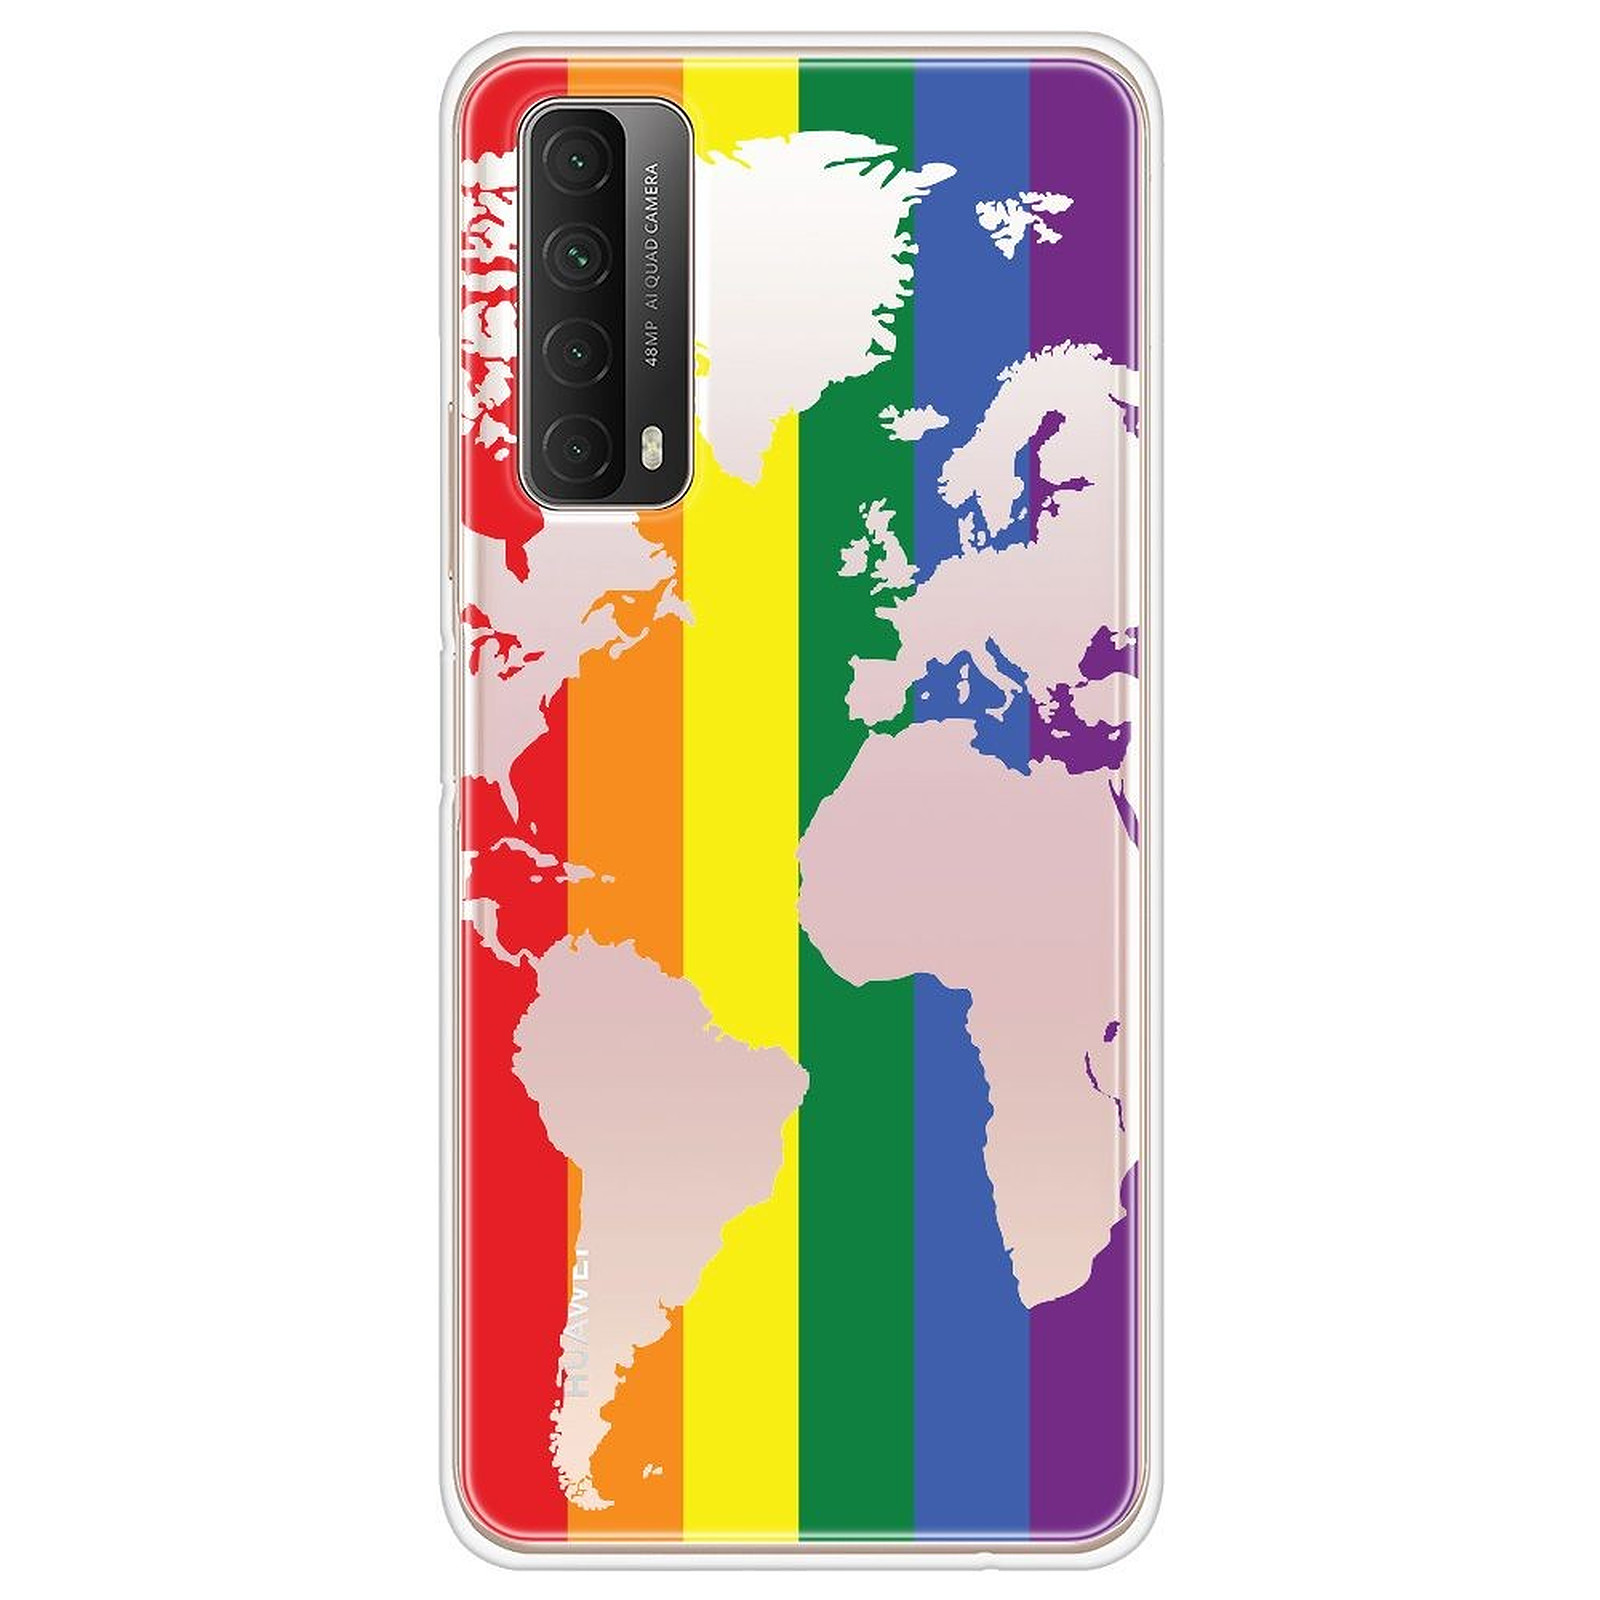 1001 Coques Coque silicone gel Huawei P Smart 2021 motif Map LGBT - Coque telephone 1001Coques